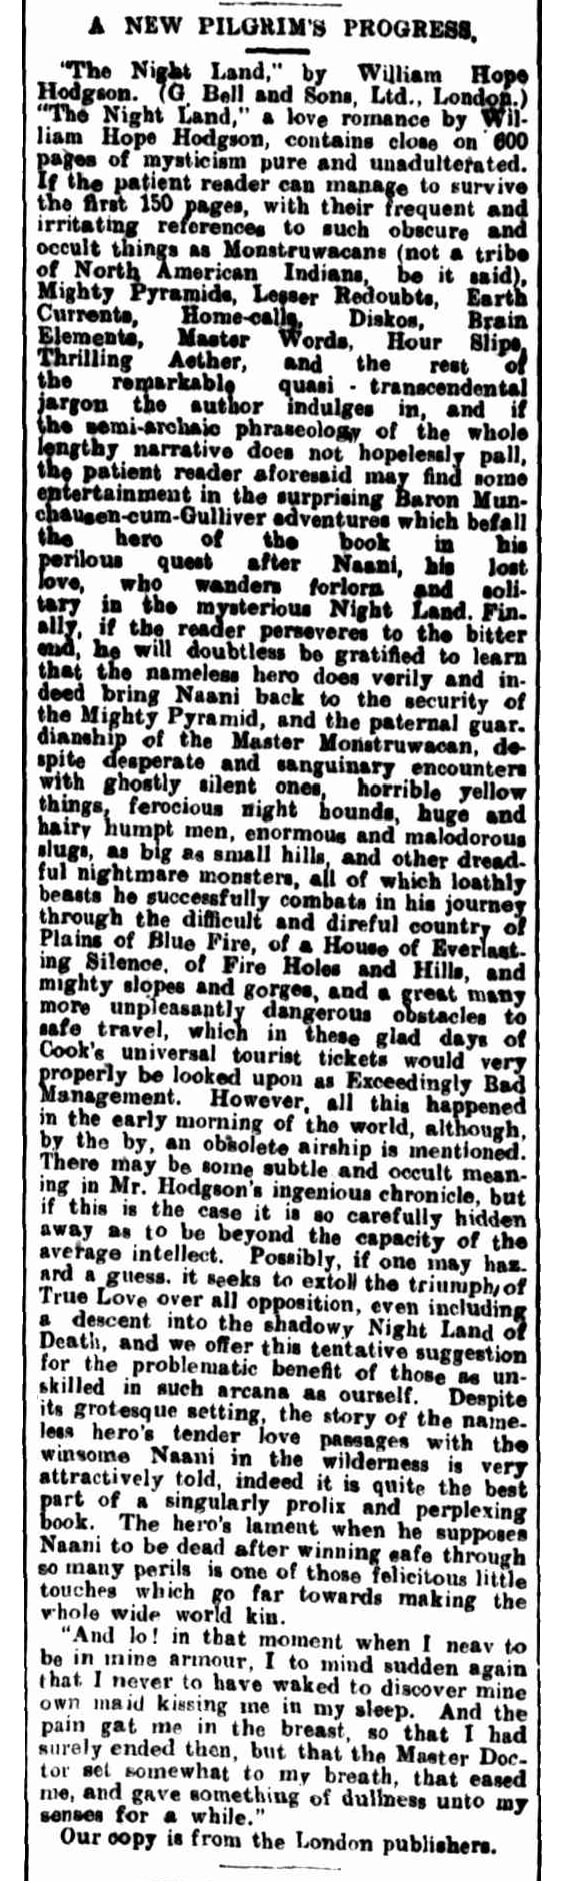 Review of The Night Land by William Hope Hodgson from the Western Mail (Perth), June 1, 1912